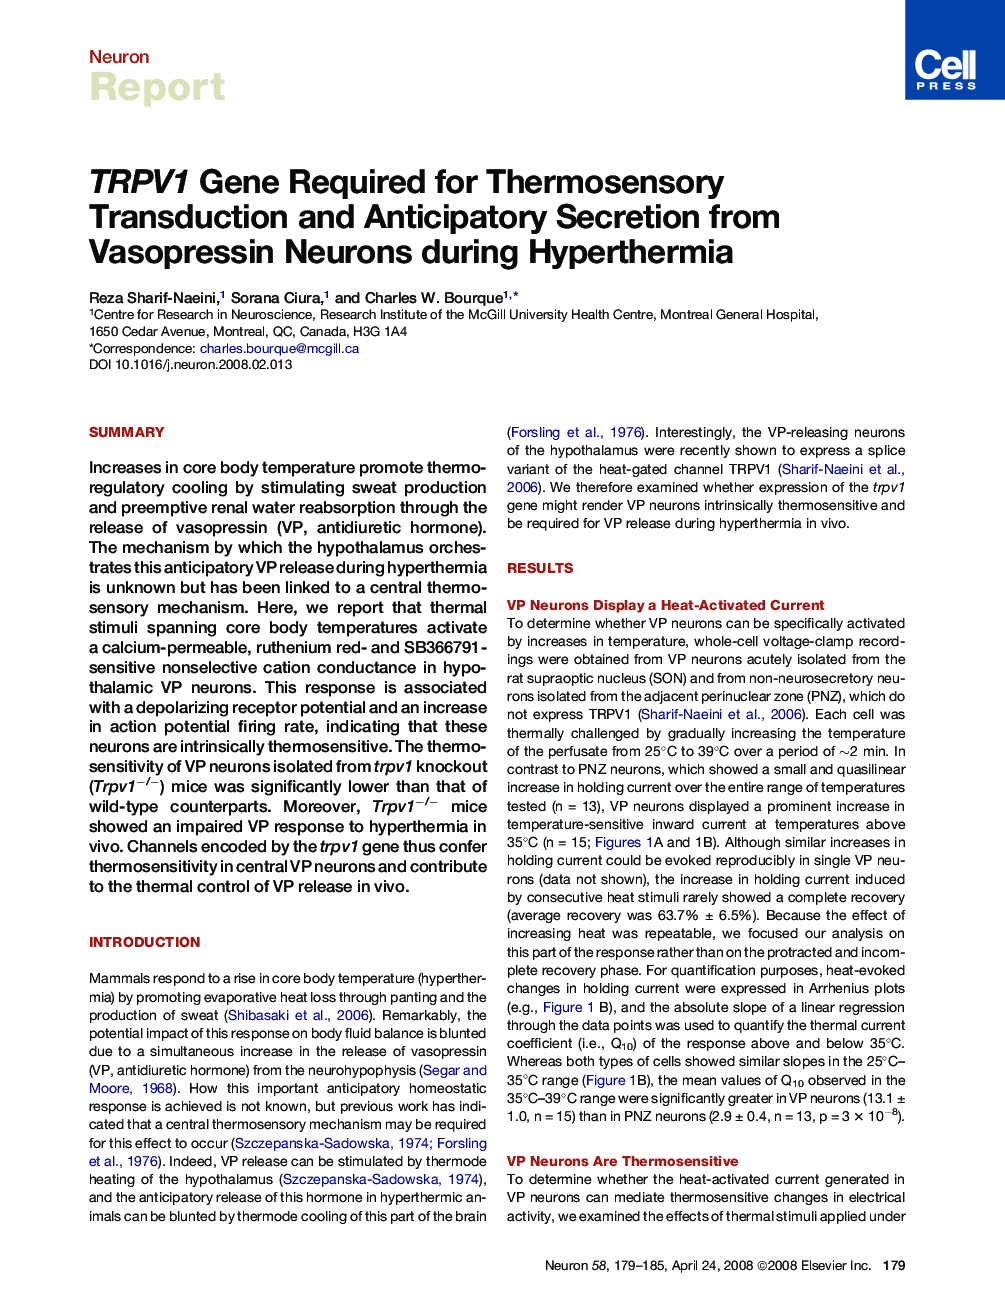 TRPV1 Gene Required for Thermosensory Transduction and Anticipatory Secretion from Vasopressin Neurons during Hyperthermia